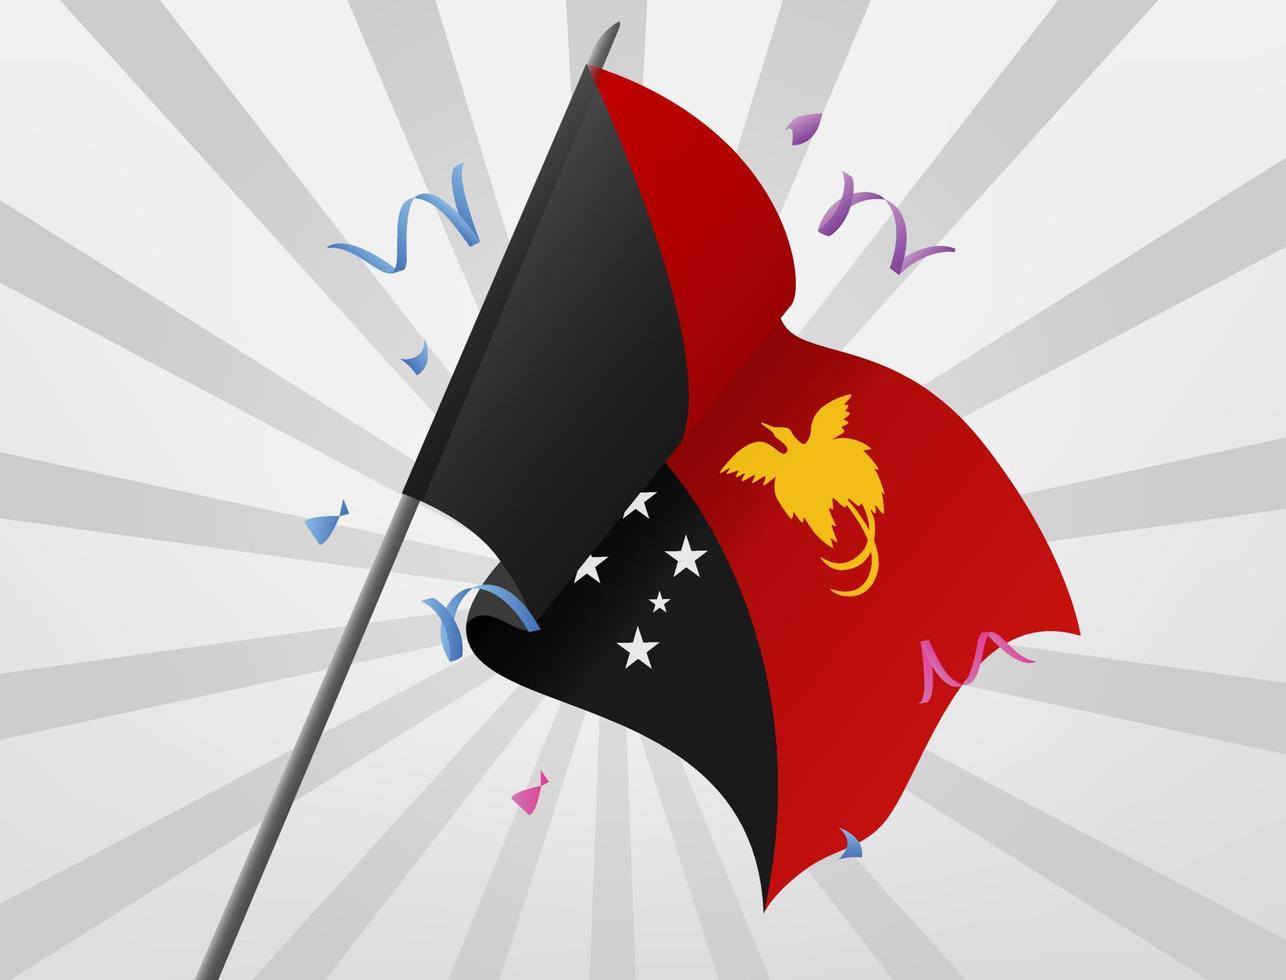 The Papua New Guinea celebratory flag flew at a height vector